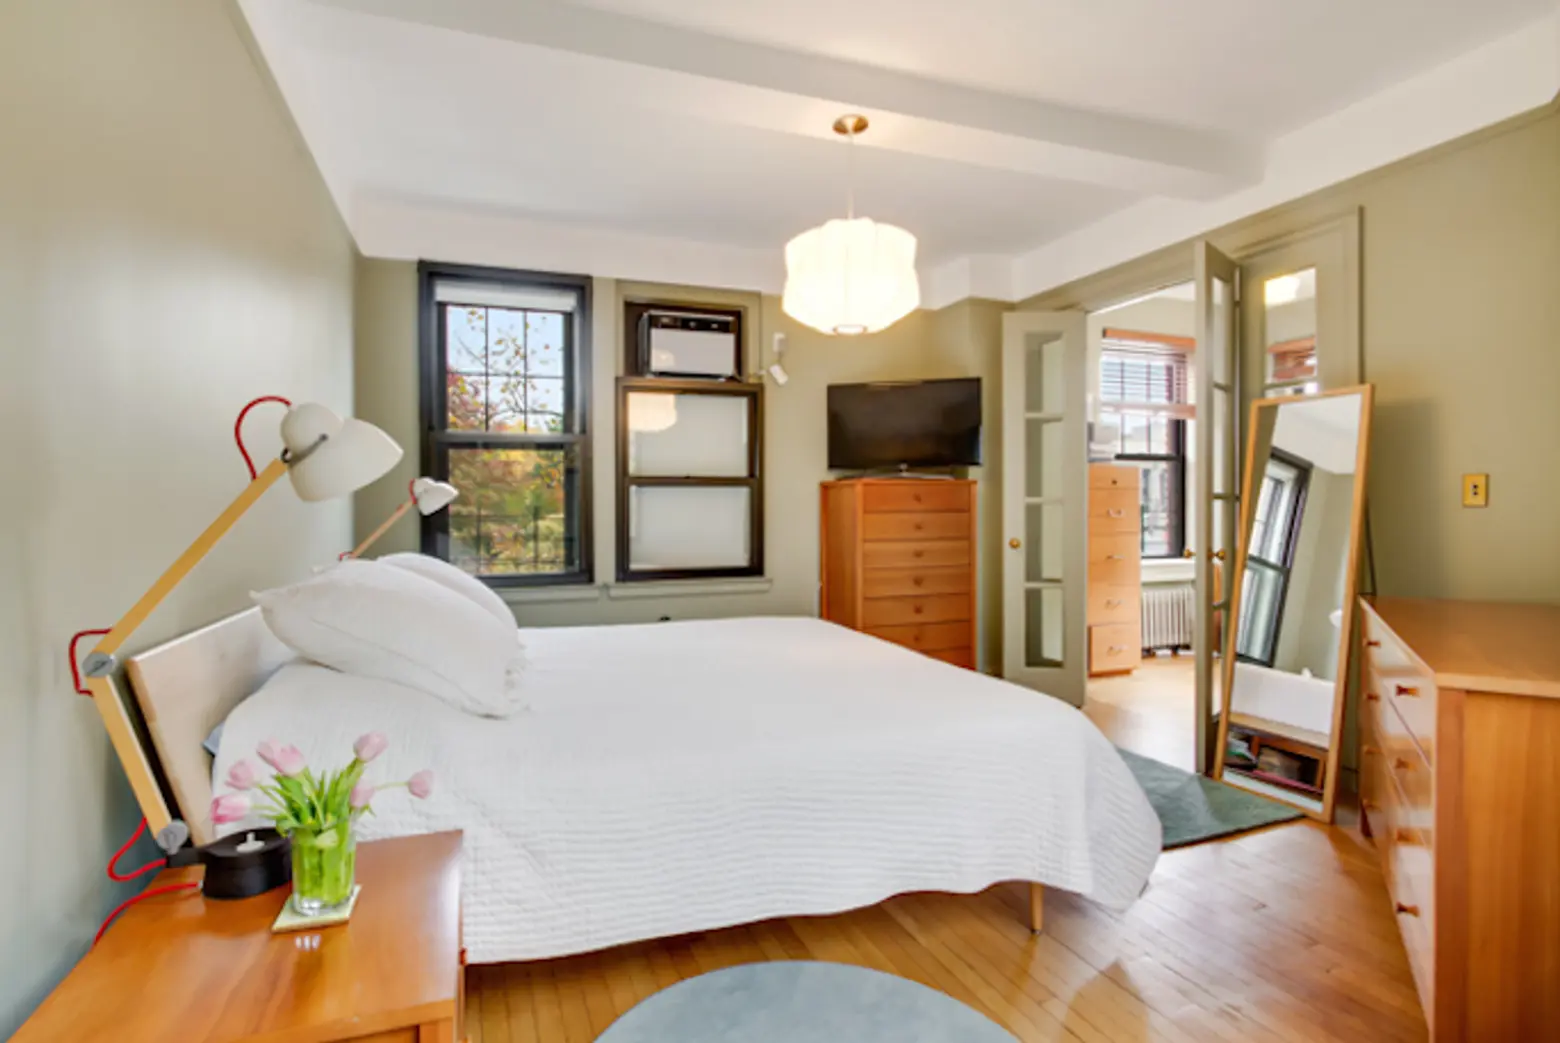 47 Plaza Street West, Rosario Candela, Cool listing, classic seven, Brooklyn Real Estate, Brooklyn Coop for sale, cool listings, prewar, deco buidlings, residential architecture, grand army plaza, prospect park